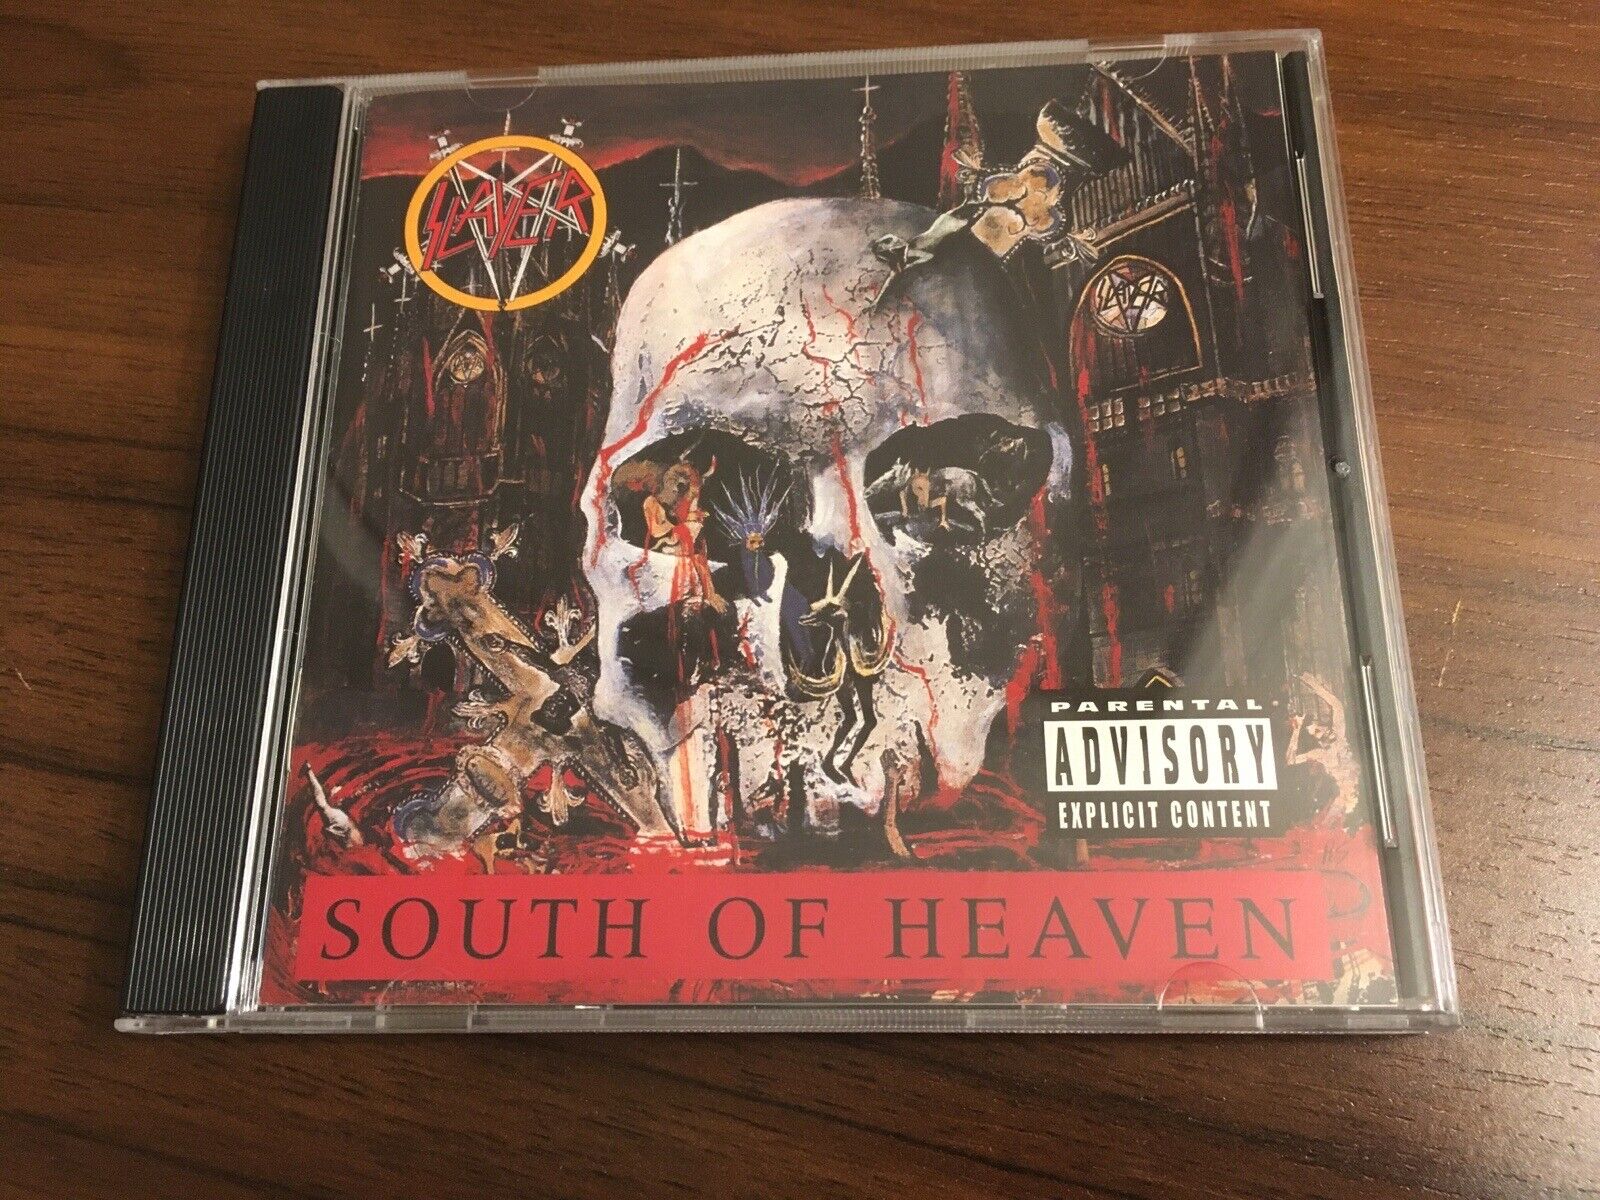 South of Heaven by Slayer (CD, American Recordings 314 586 797-2)